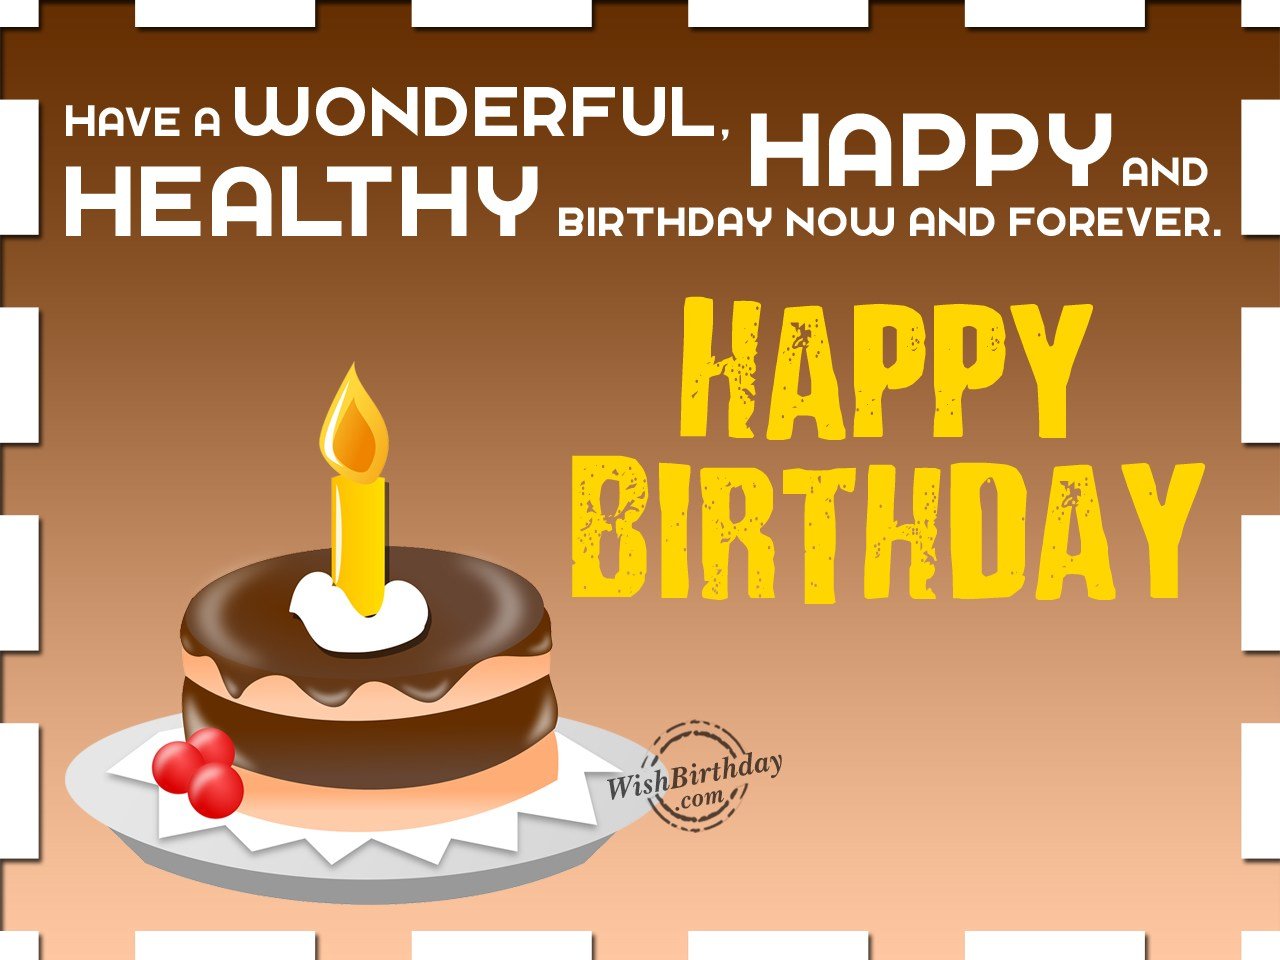 Have a wonderful, happy and healthy birthday now and ...